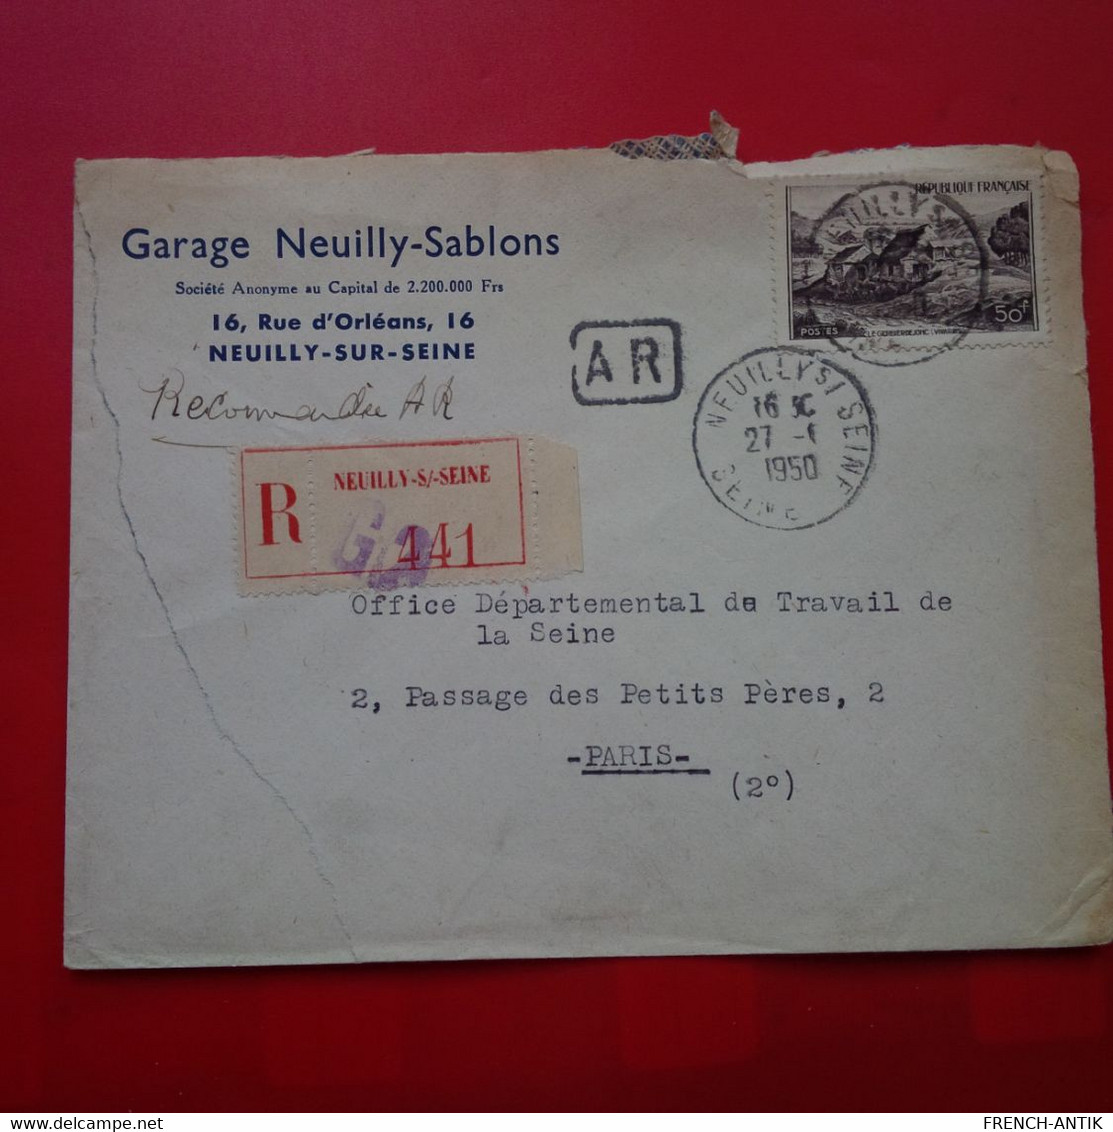 LETTRE RECOMMANDE NEUILLY SUR SEINE GARAGE NEUILLY SABLONS - Covers & Documents